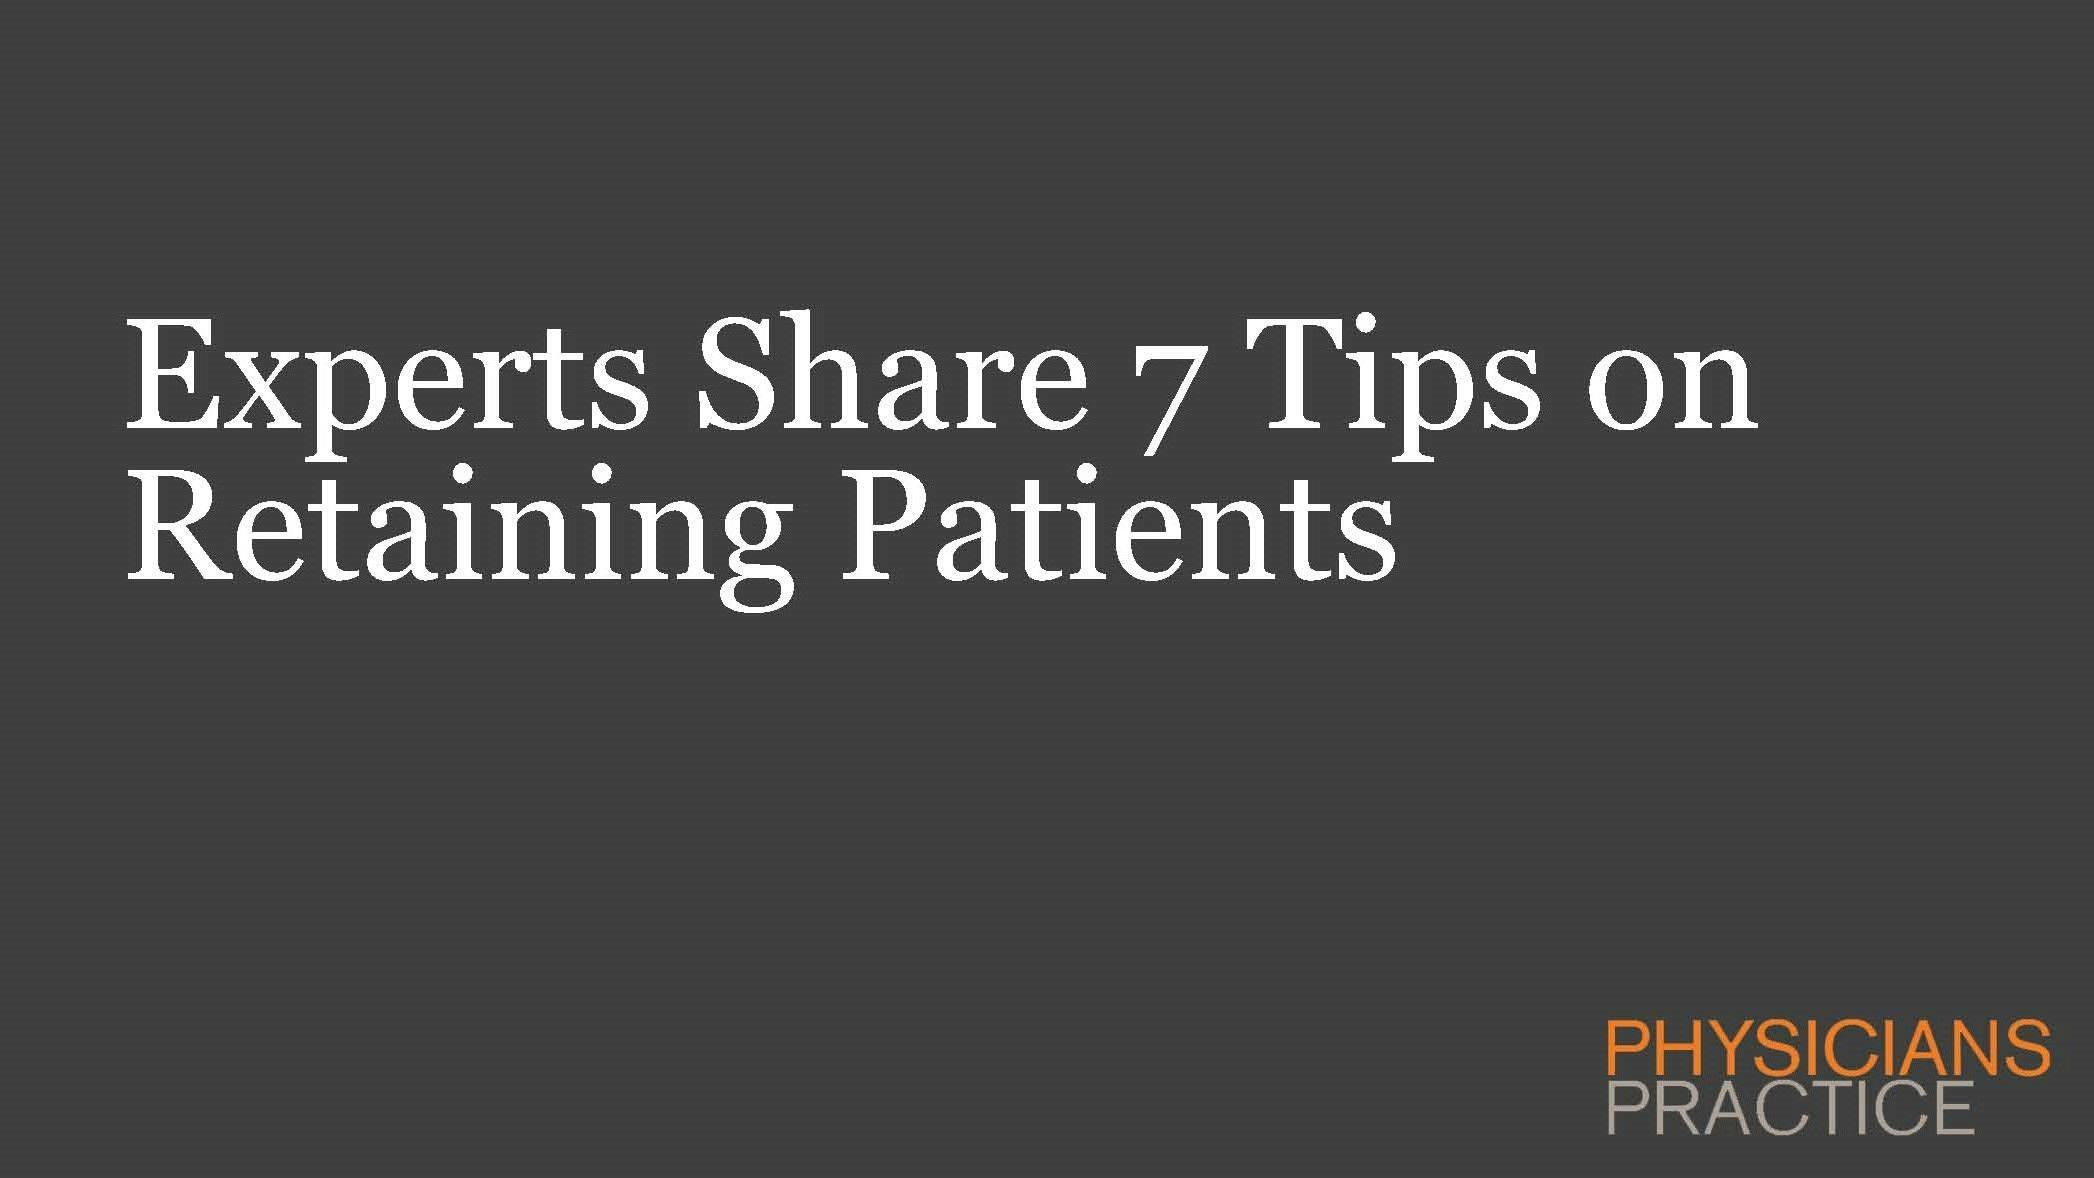 Experts Share 7 Tips on Retaining Patients 